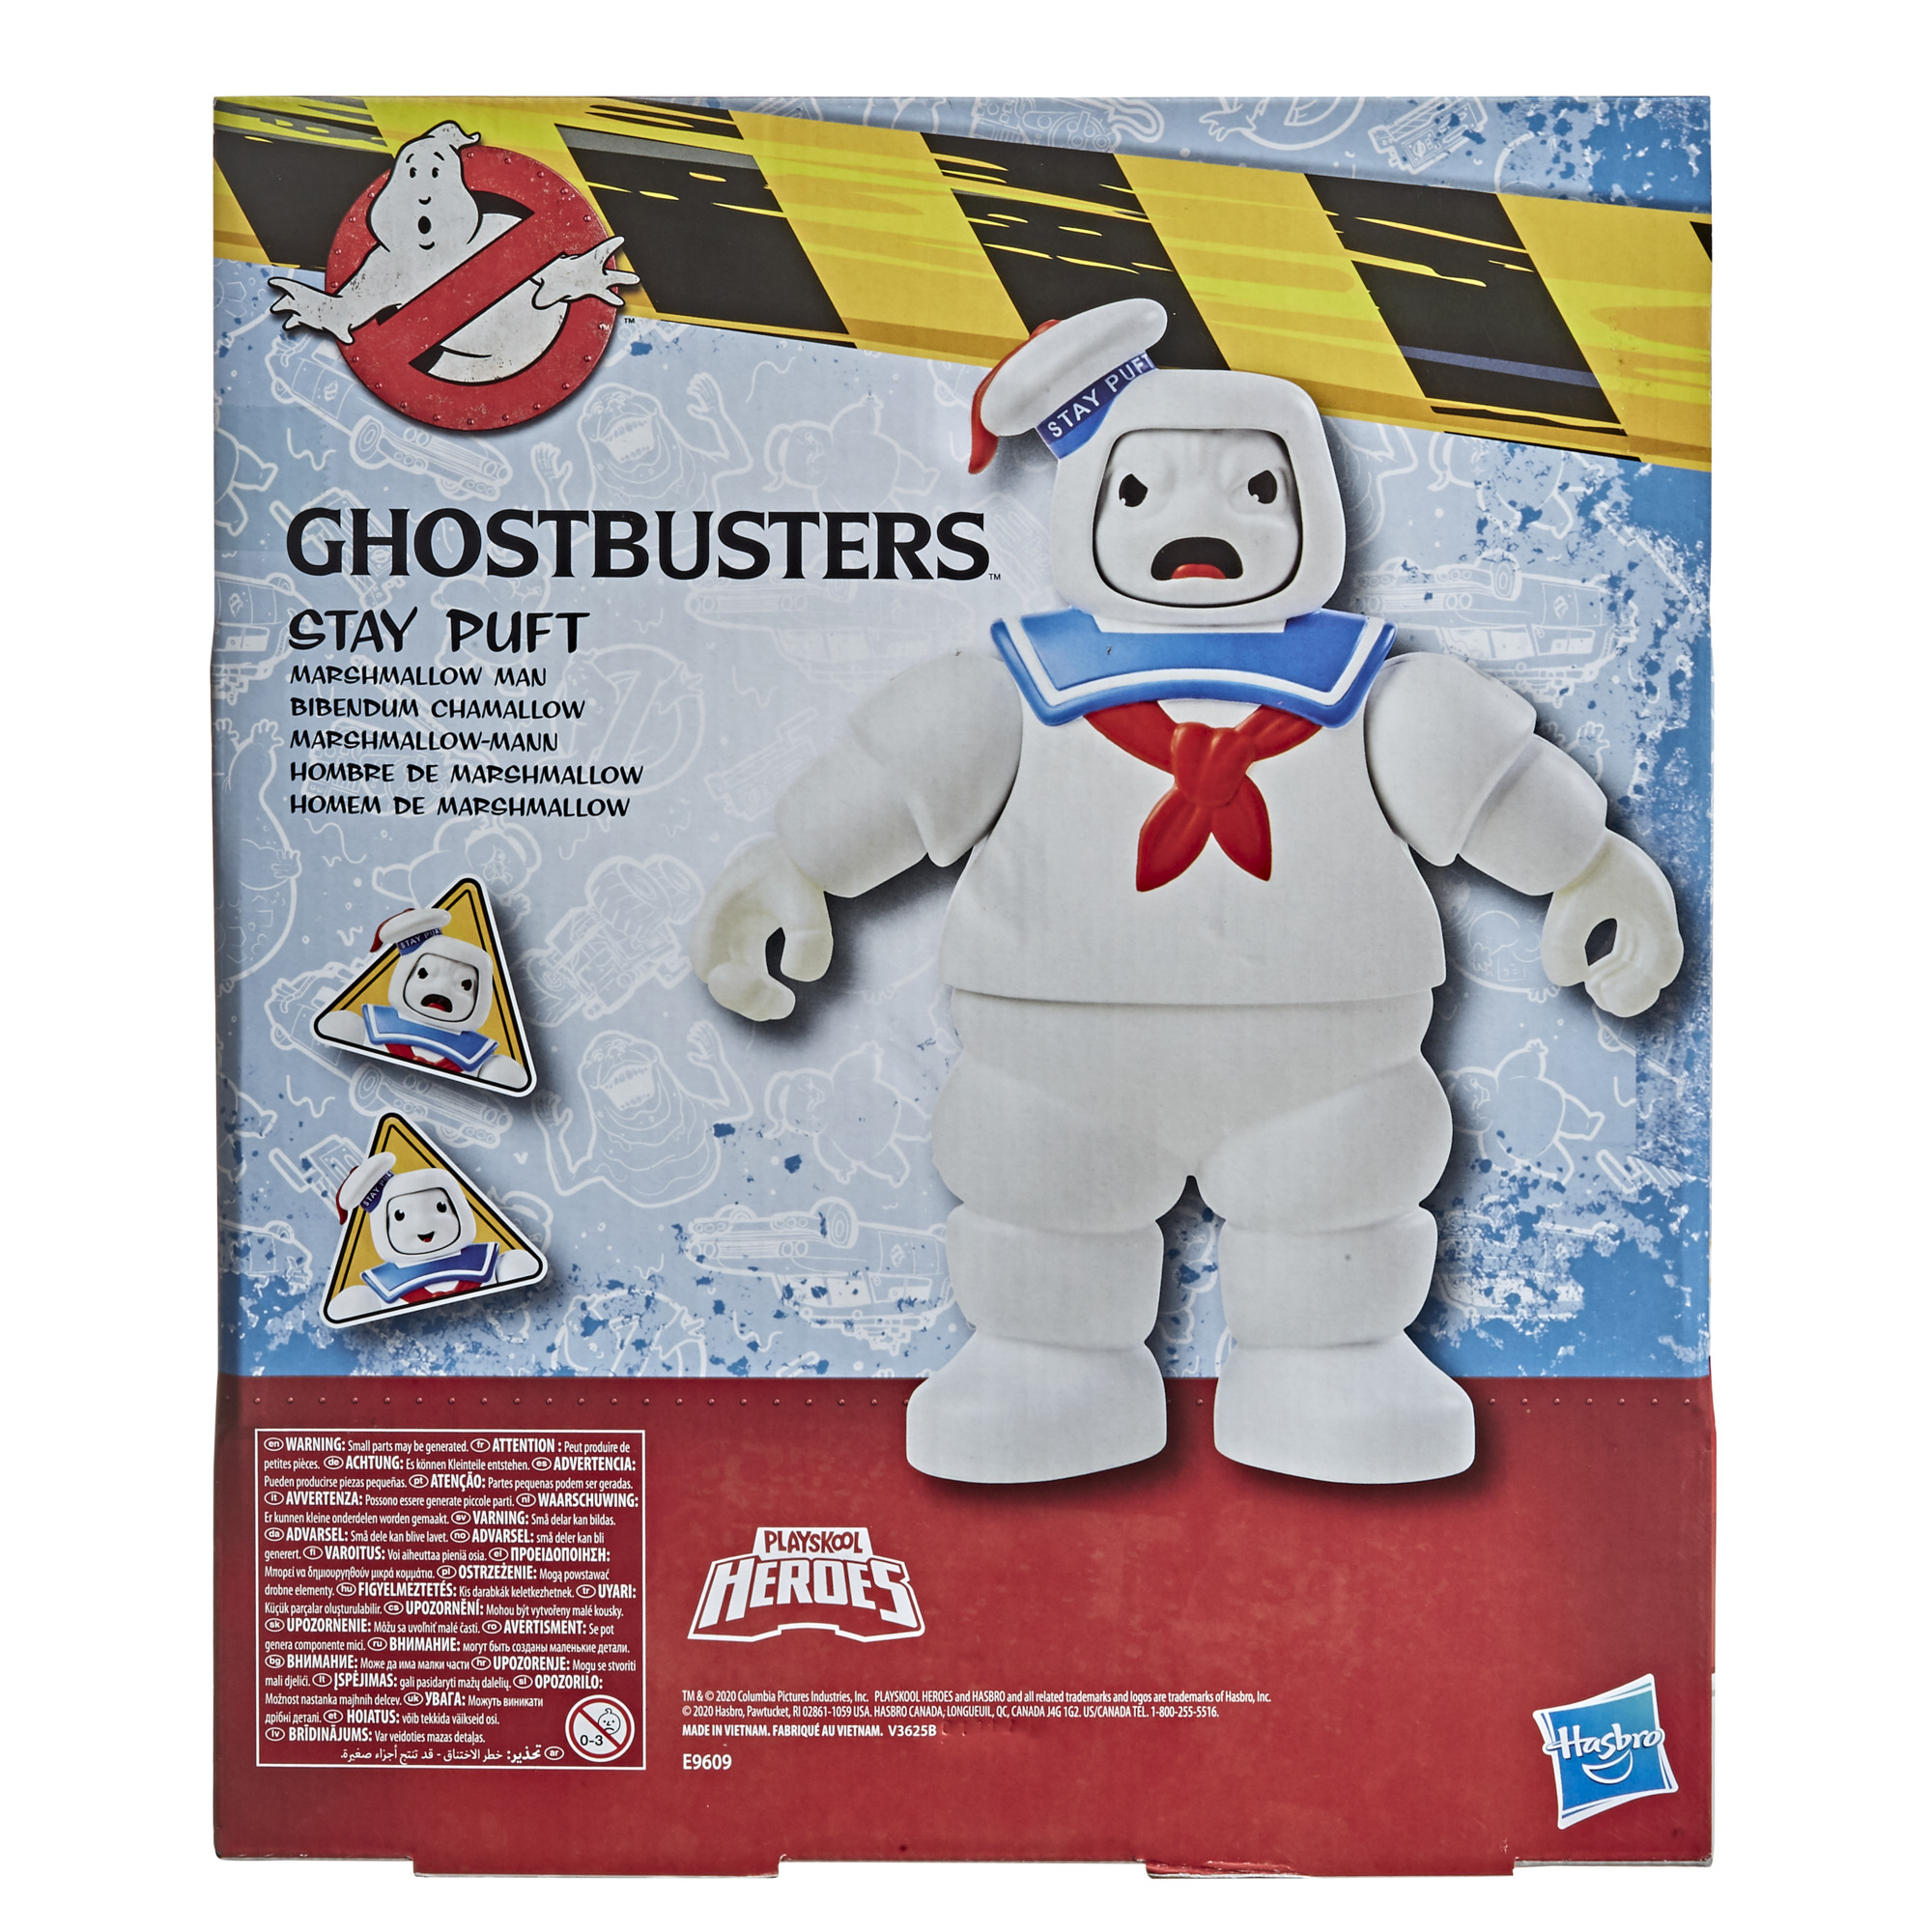 Playskool Heroes Ghostbusters Stay Puft Marshmallow Man, Ages 3 and Up - image 5 of 7